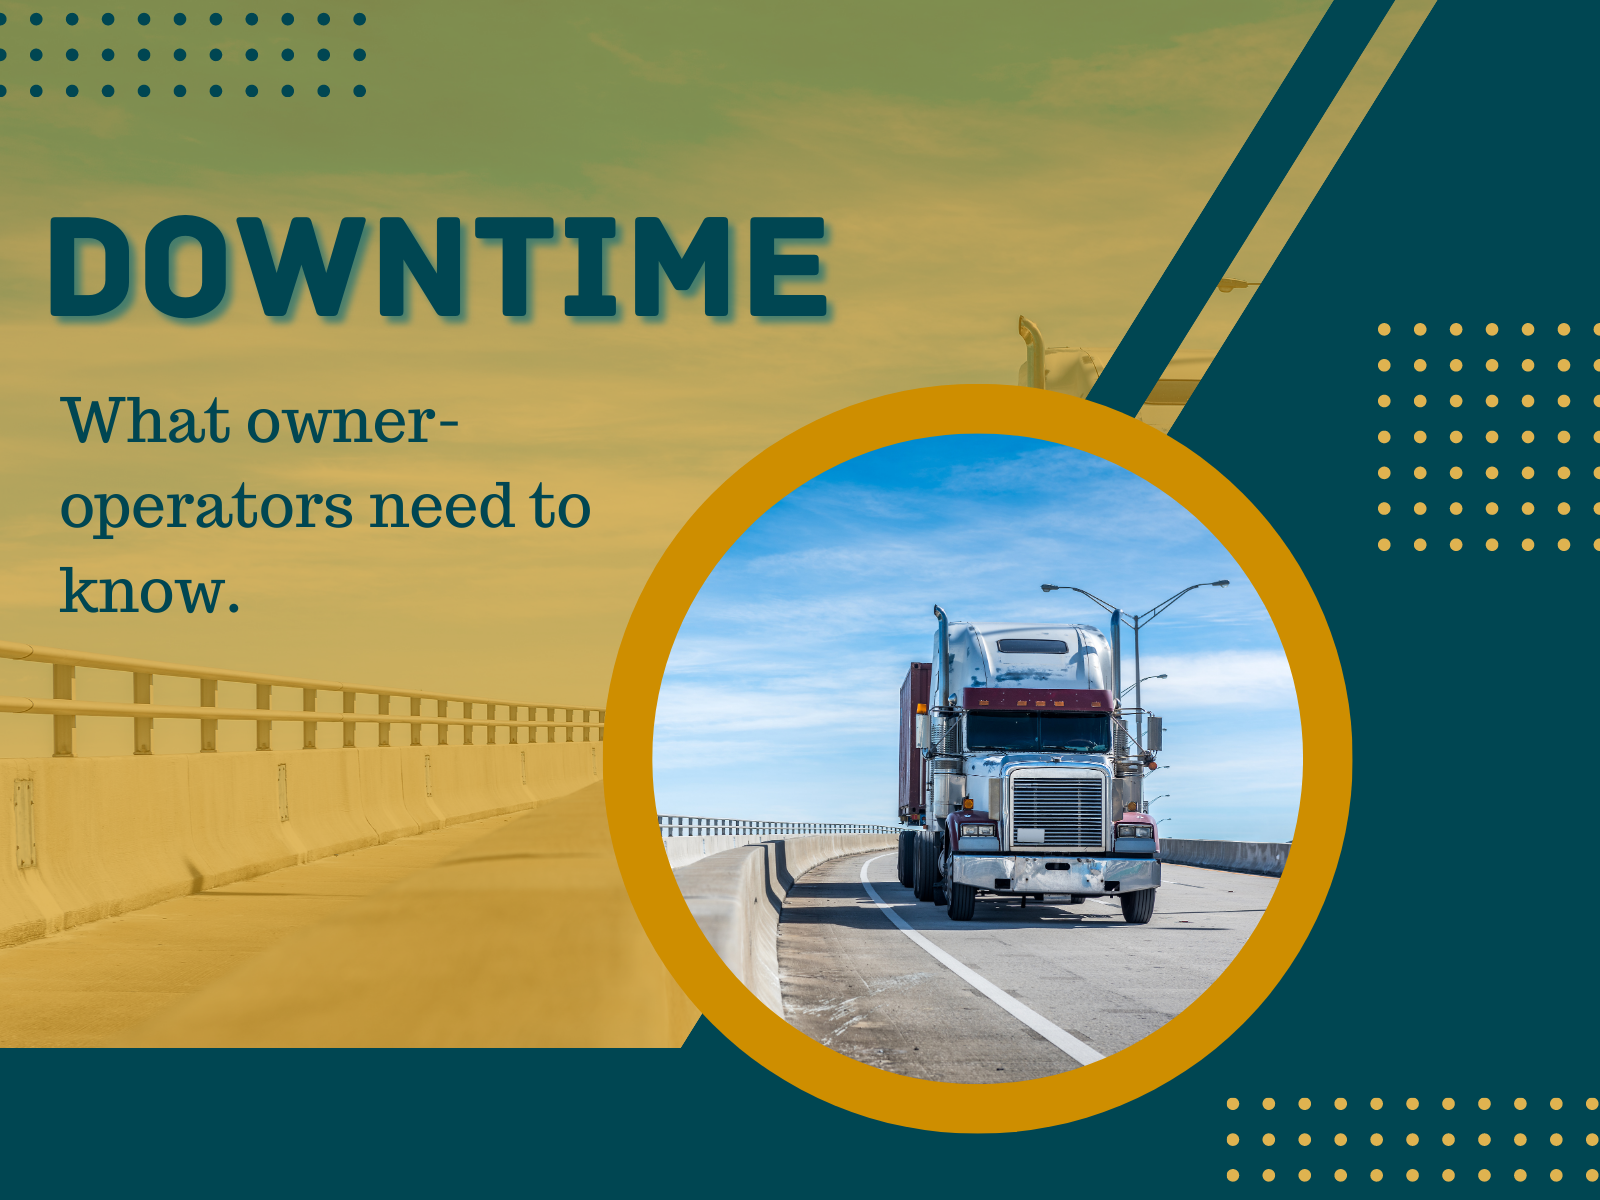 Downtime Claims What Owner Operators Need to Know